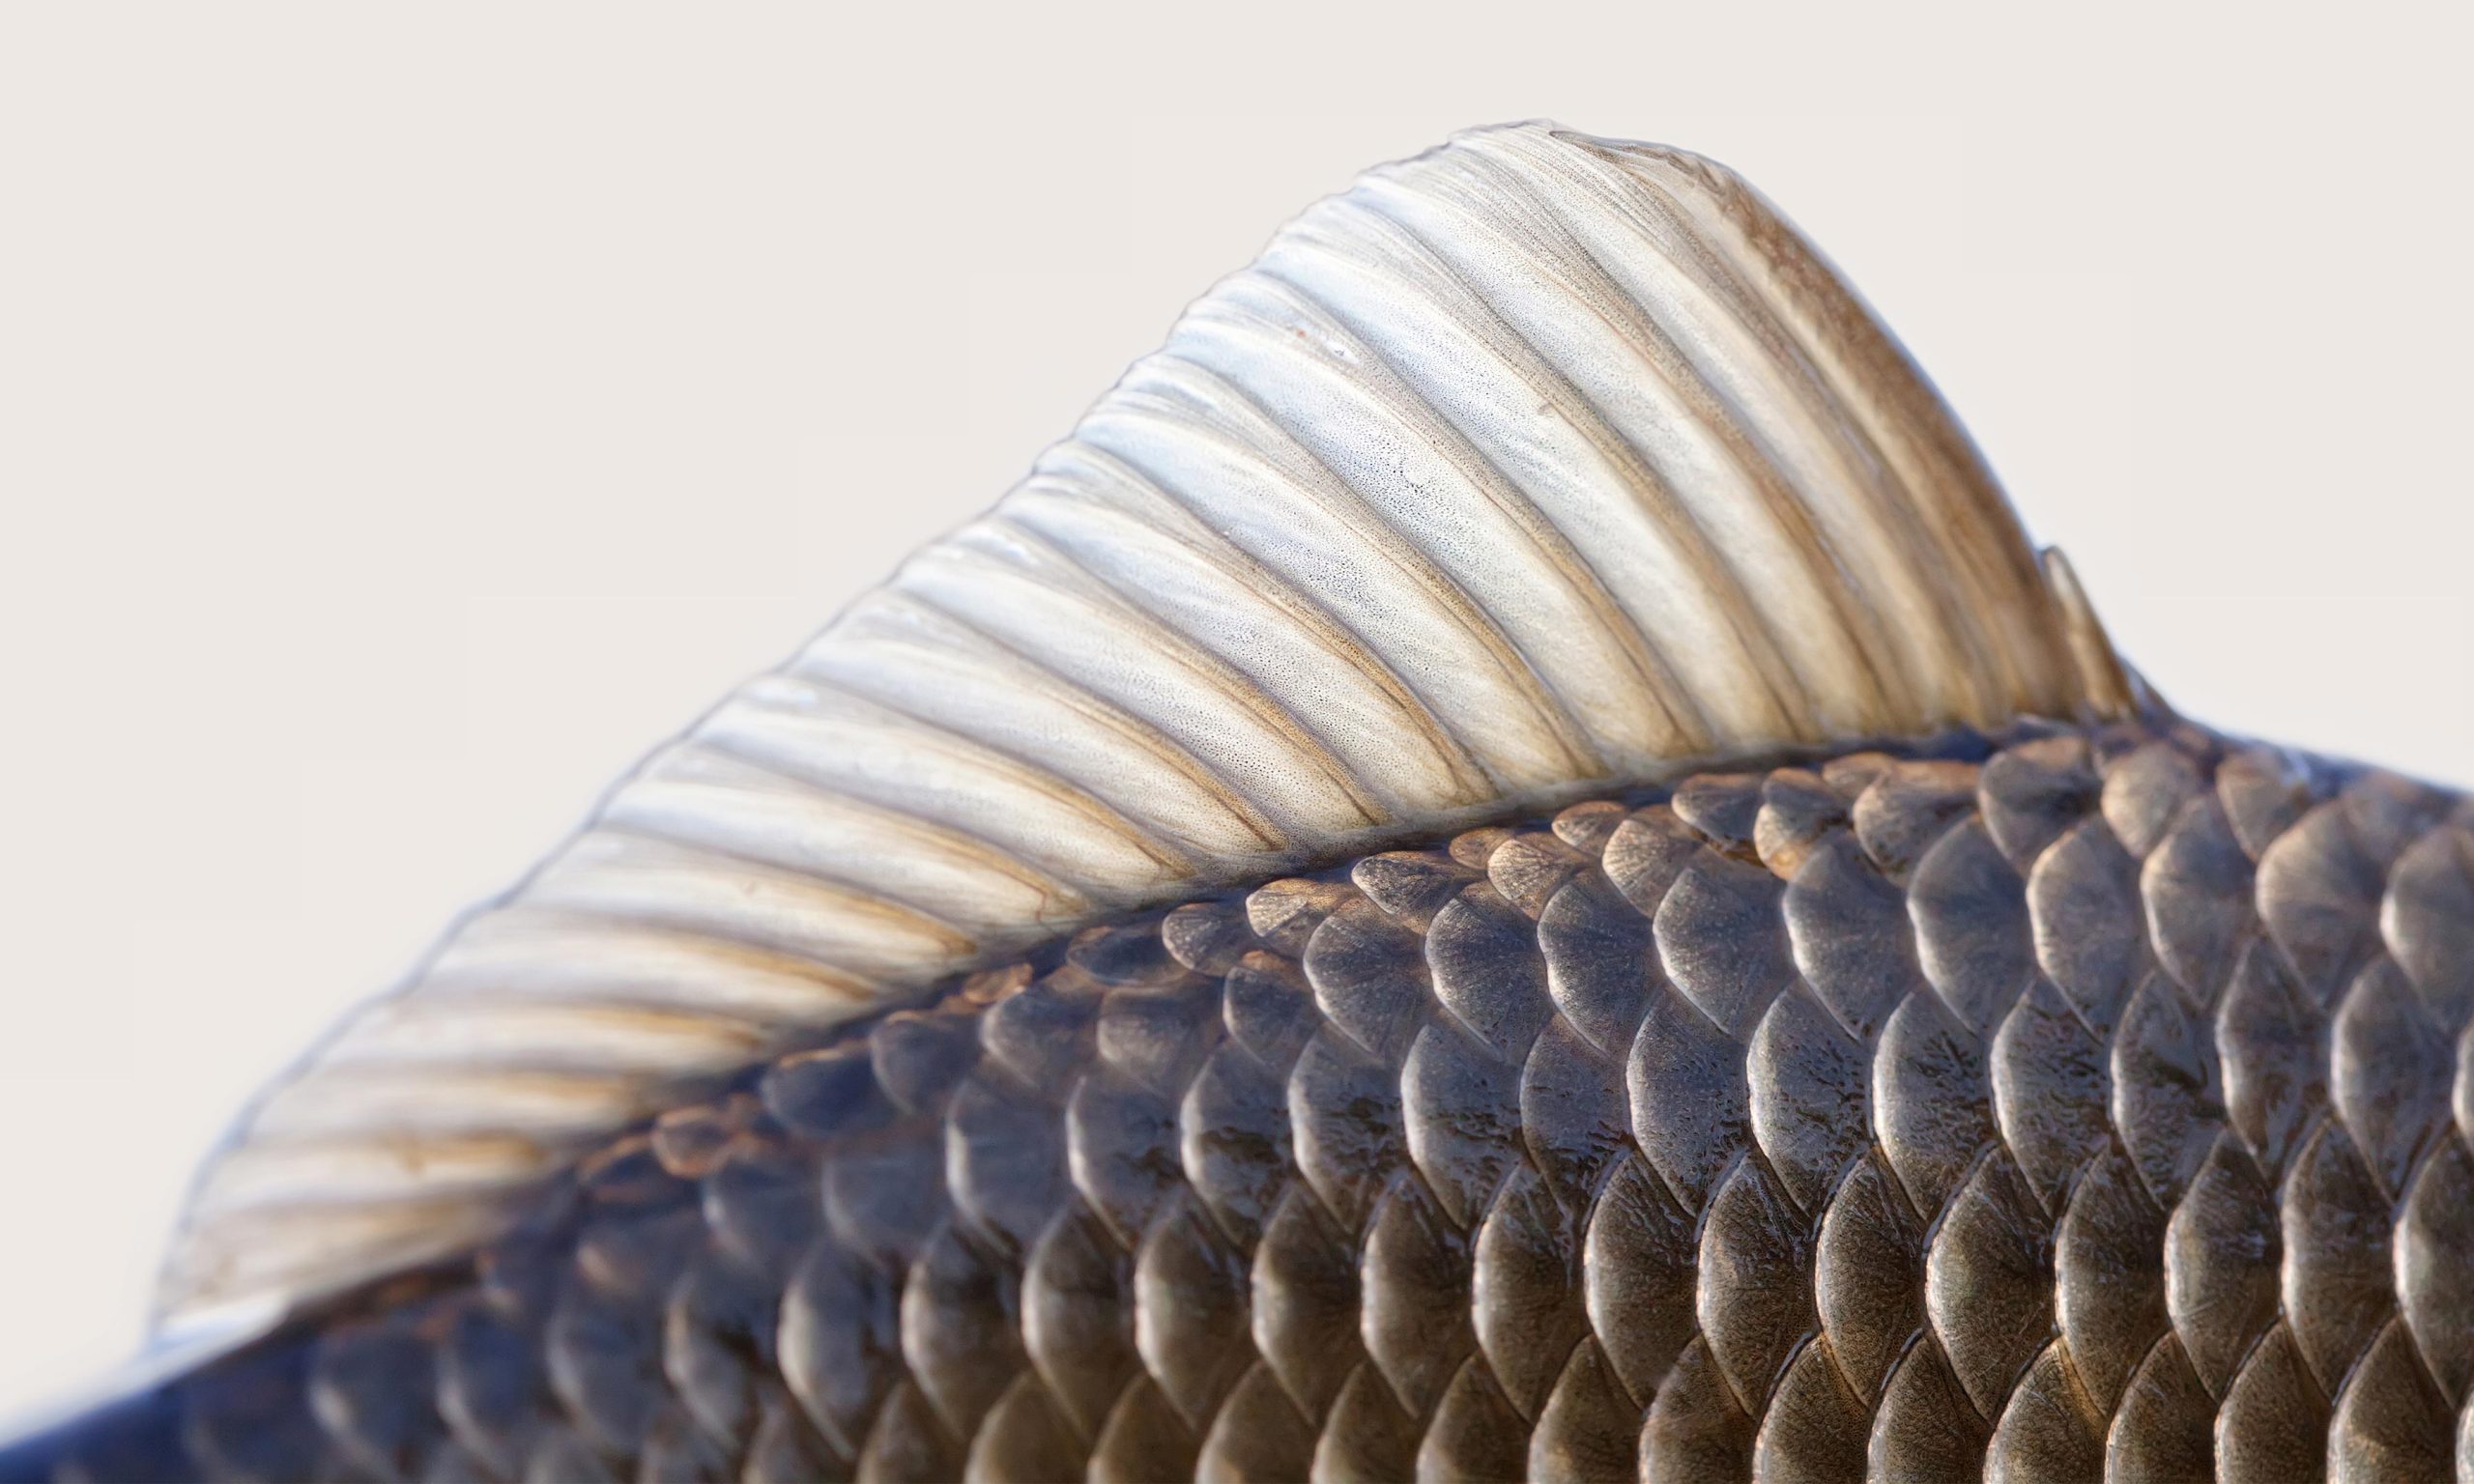 https://scitechdaily.com/images/Carp-Scales-Close-Up-scaled.jpg